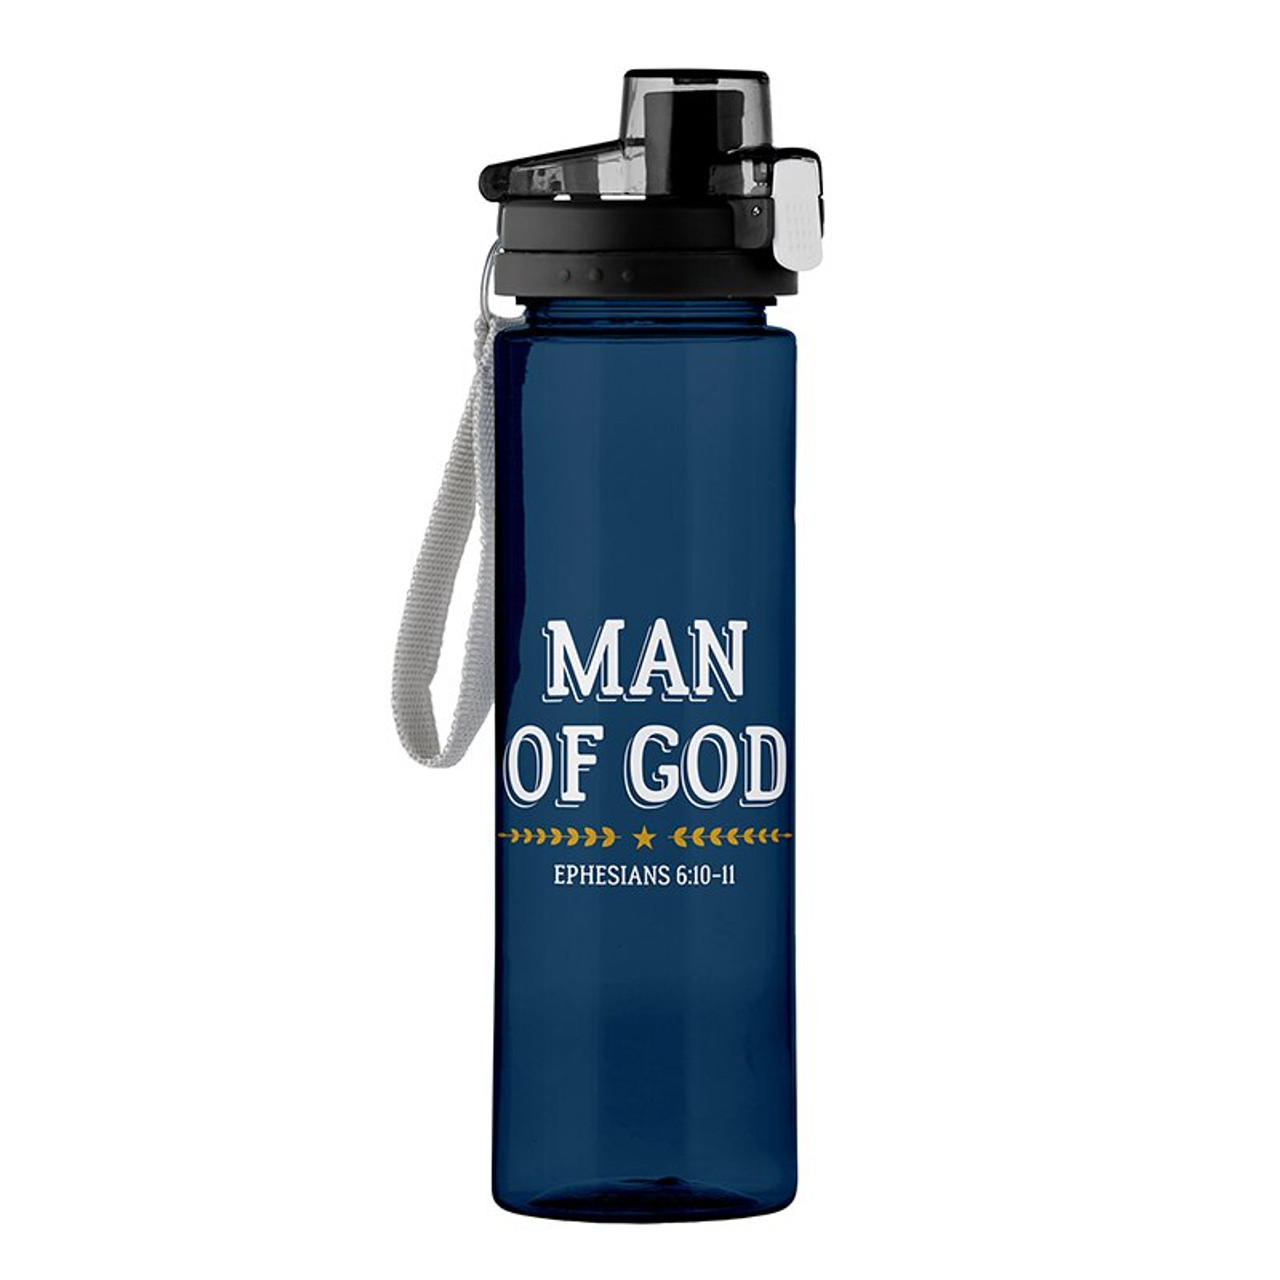 God is Good All the Time Water Bottle - 4/pk